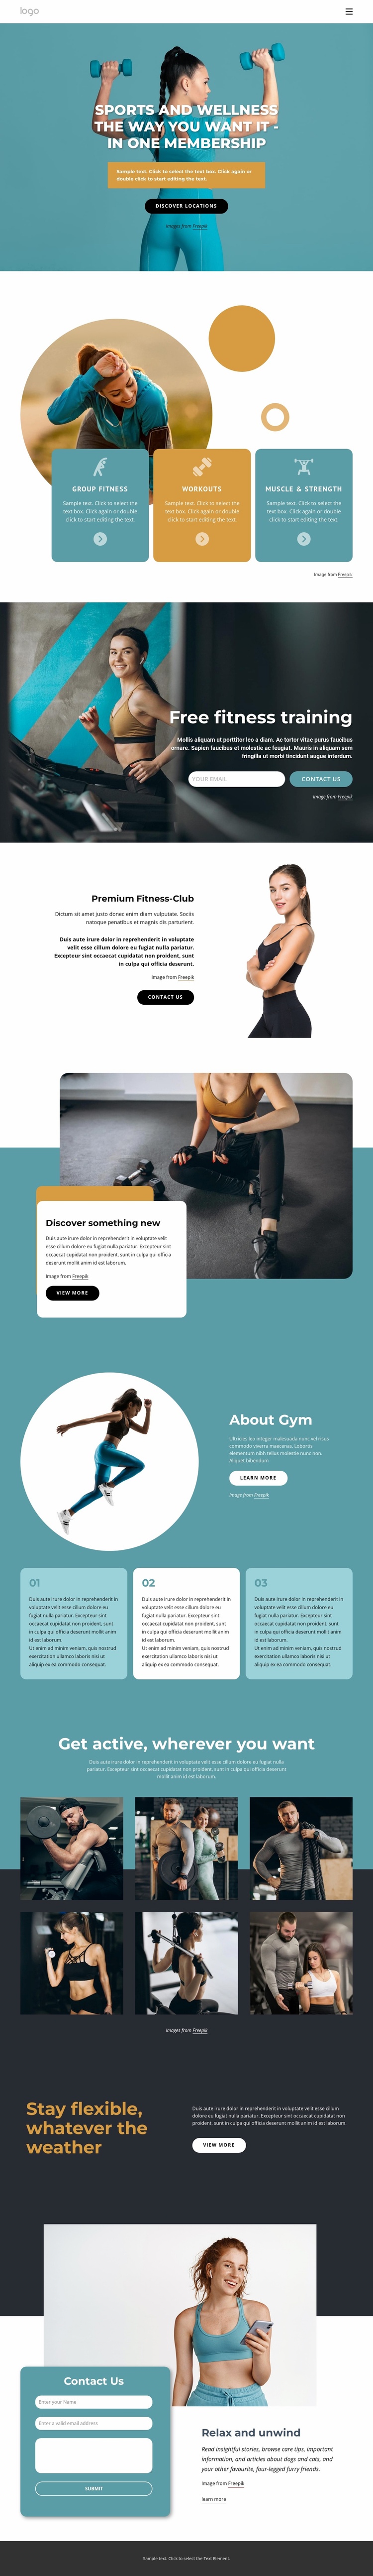 Workout anywhere with one membership Website Template